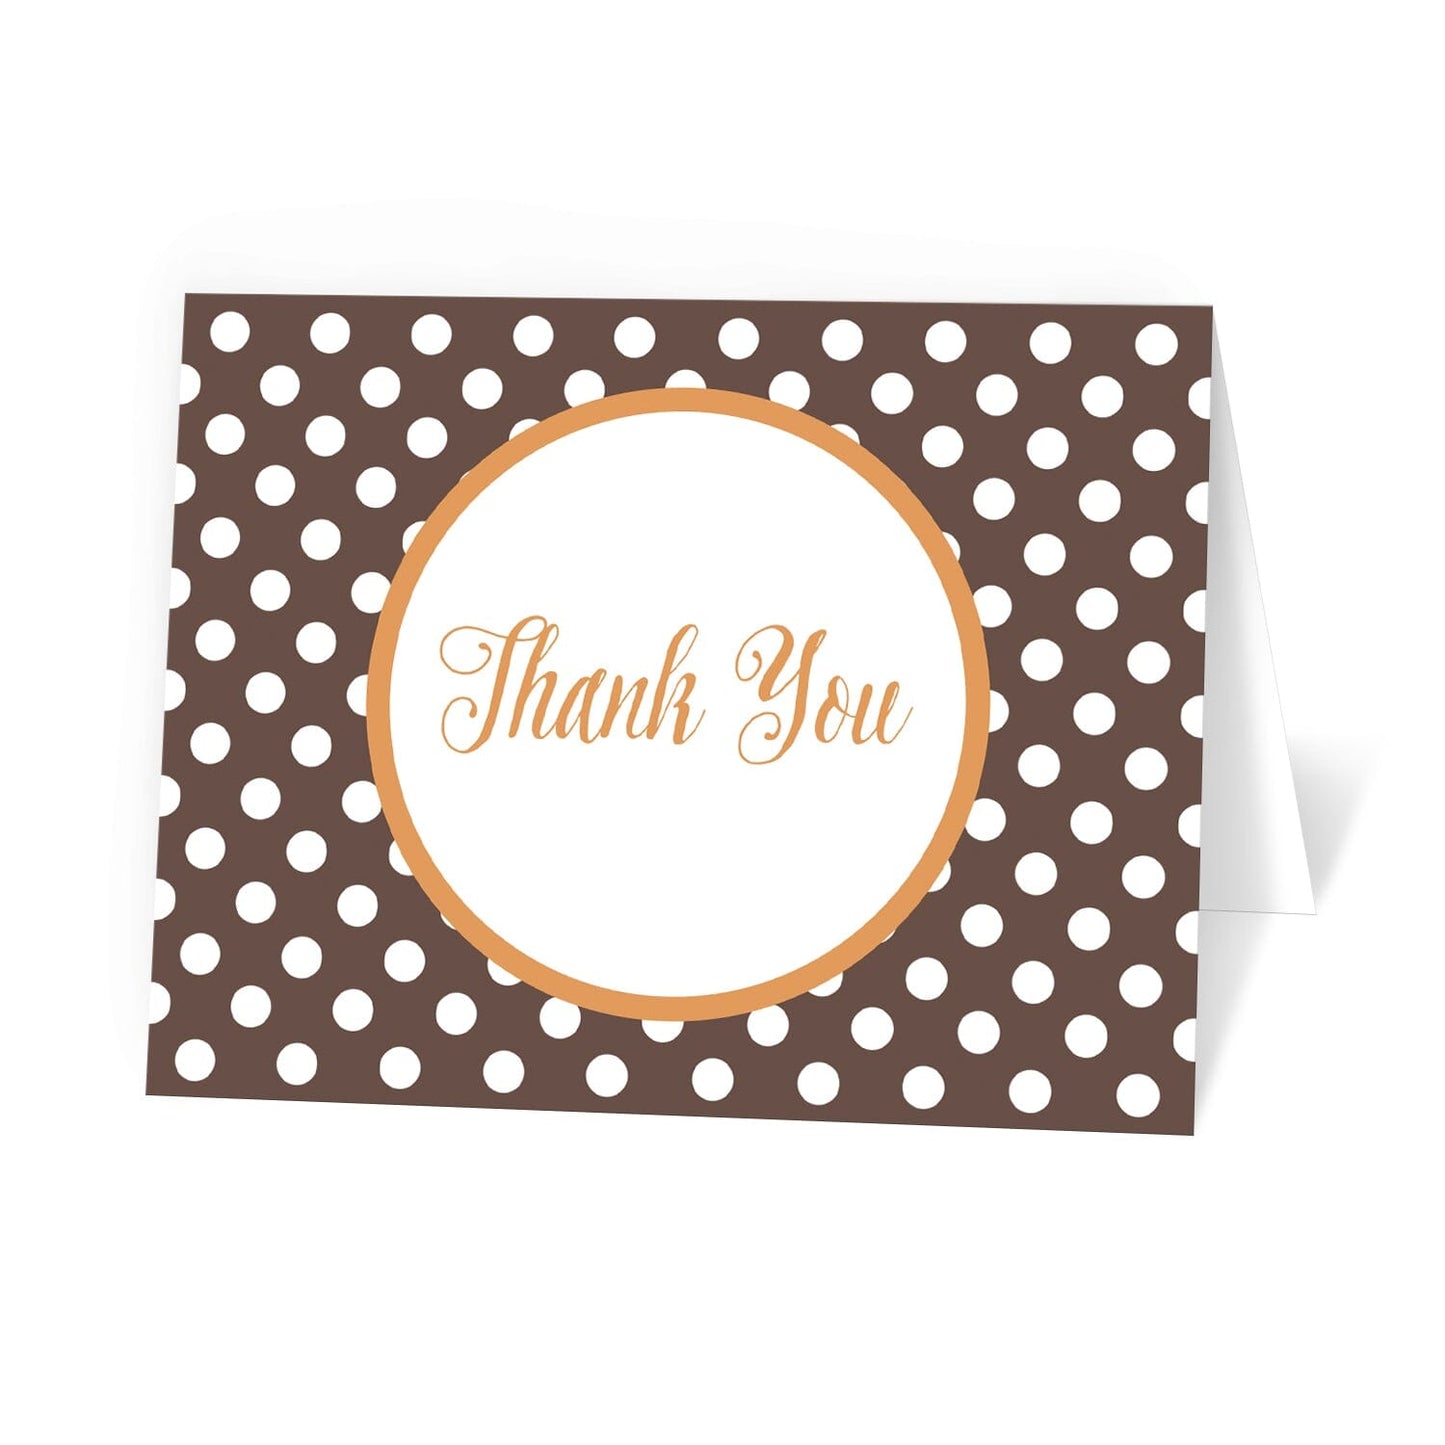 Orange Brown Polka Dot Thank You Cards at Artistically Invited.